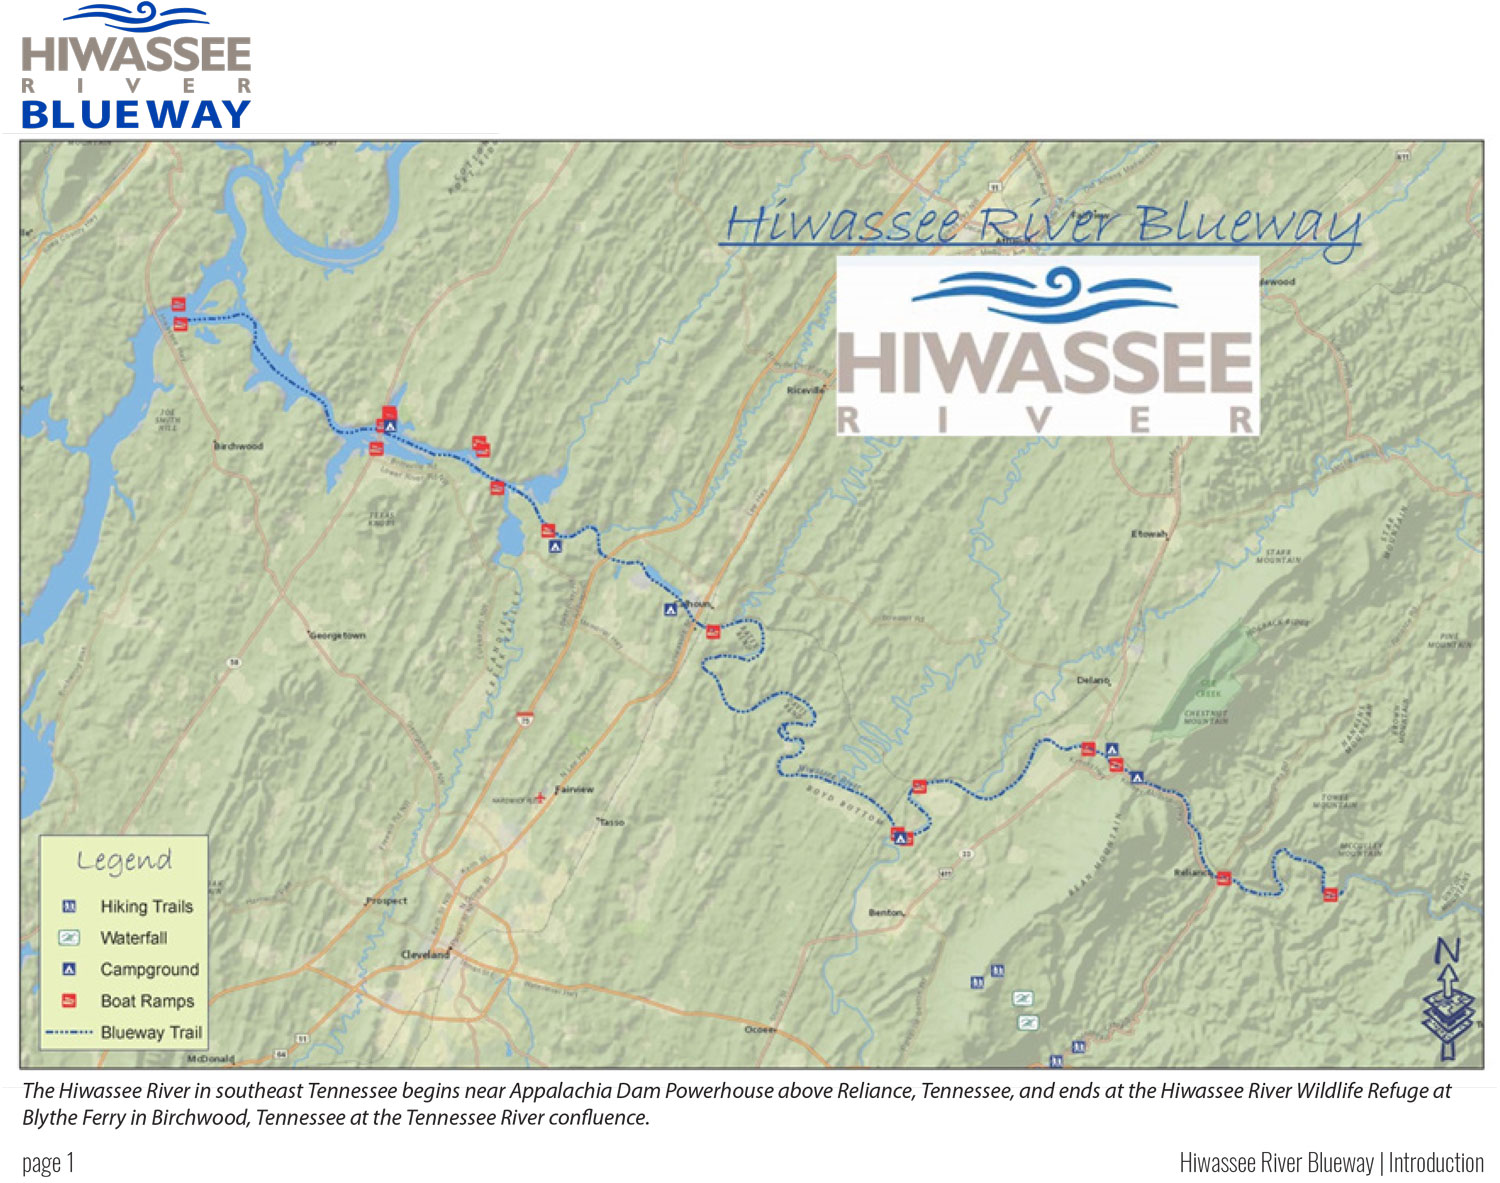 Pages-from-HiwasseeBluewayManual2016-06-29.jpg